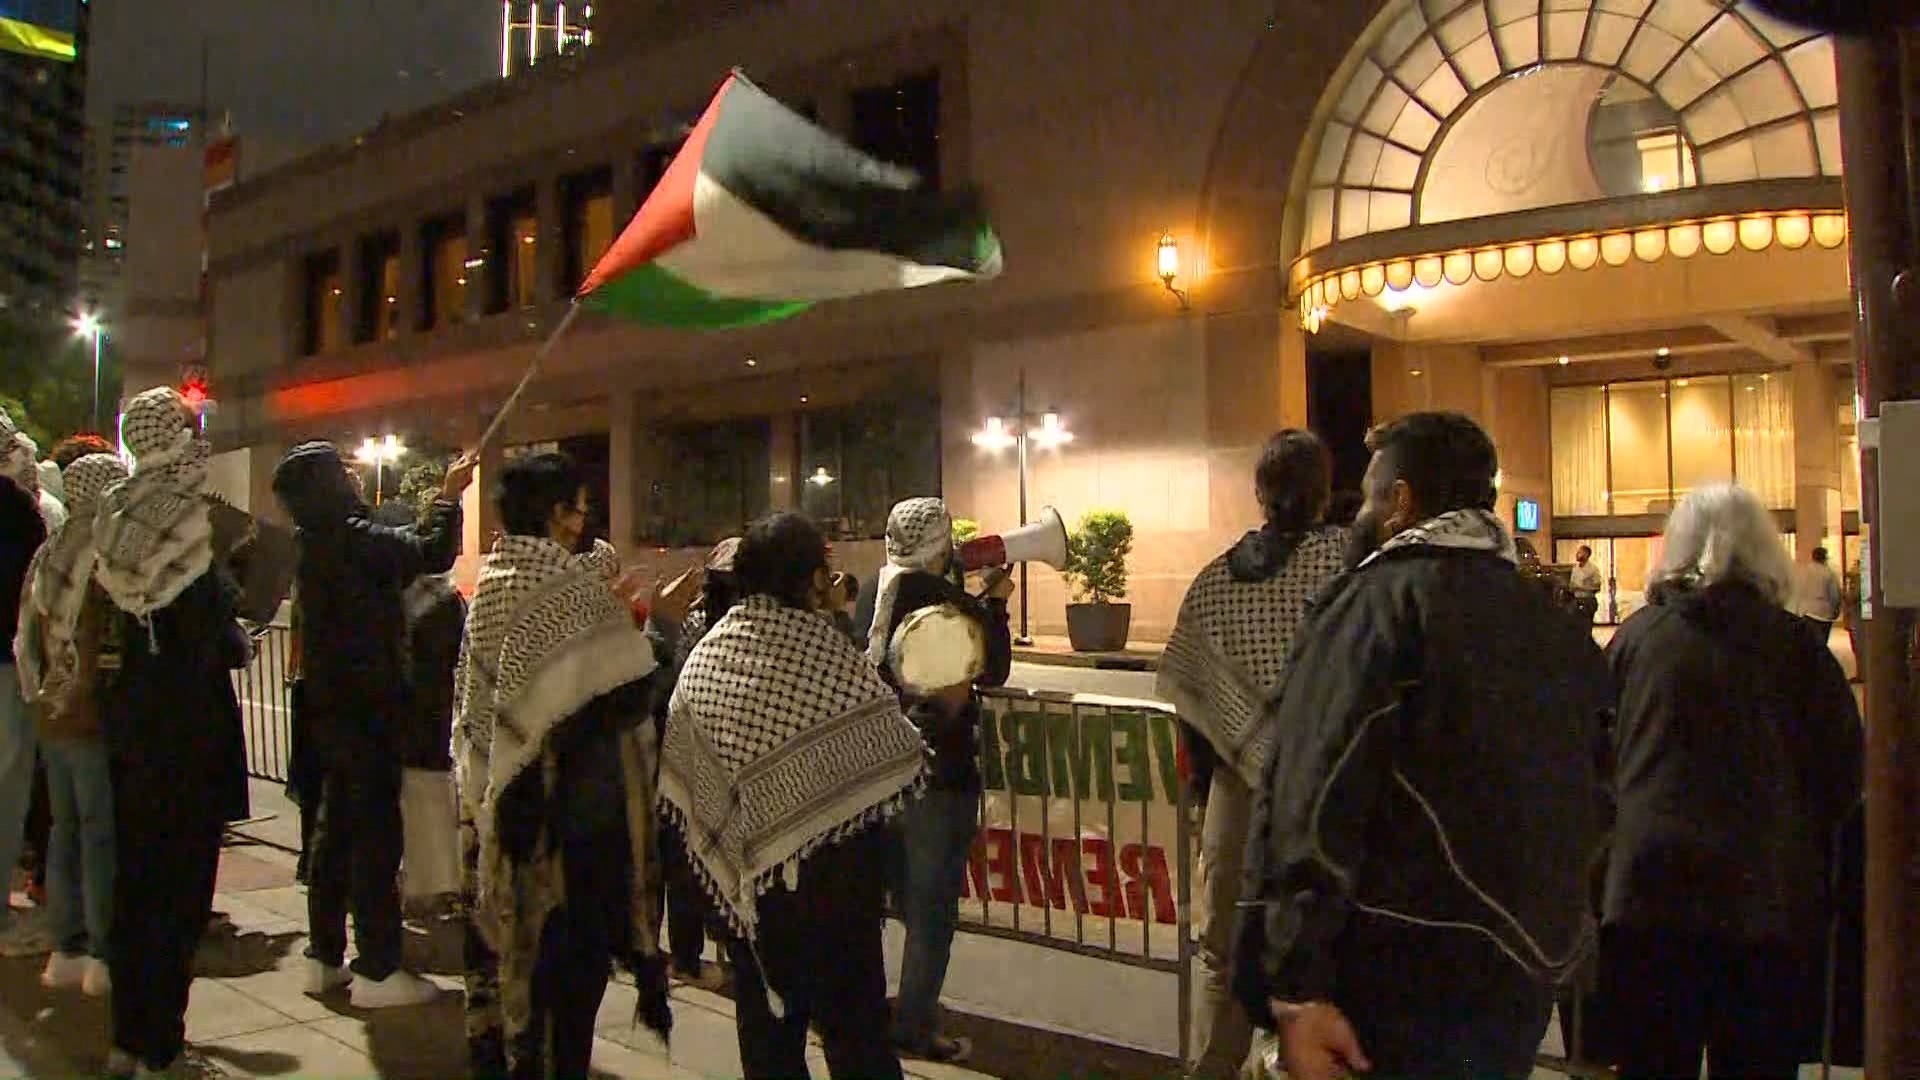 Pro-Palestinian protesters gathered outside the Fairmont Hotel in Dallas to protest Joe Biden's visit.